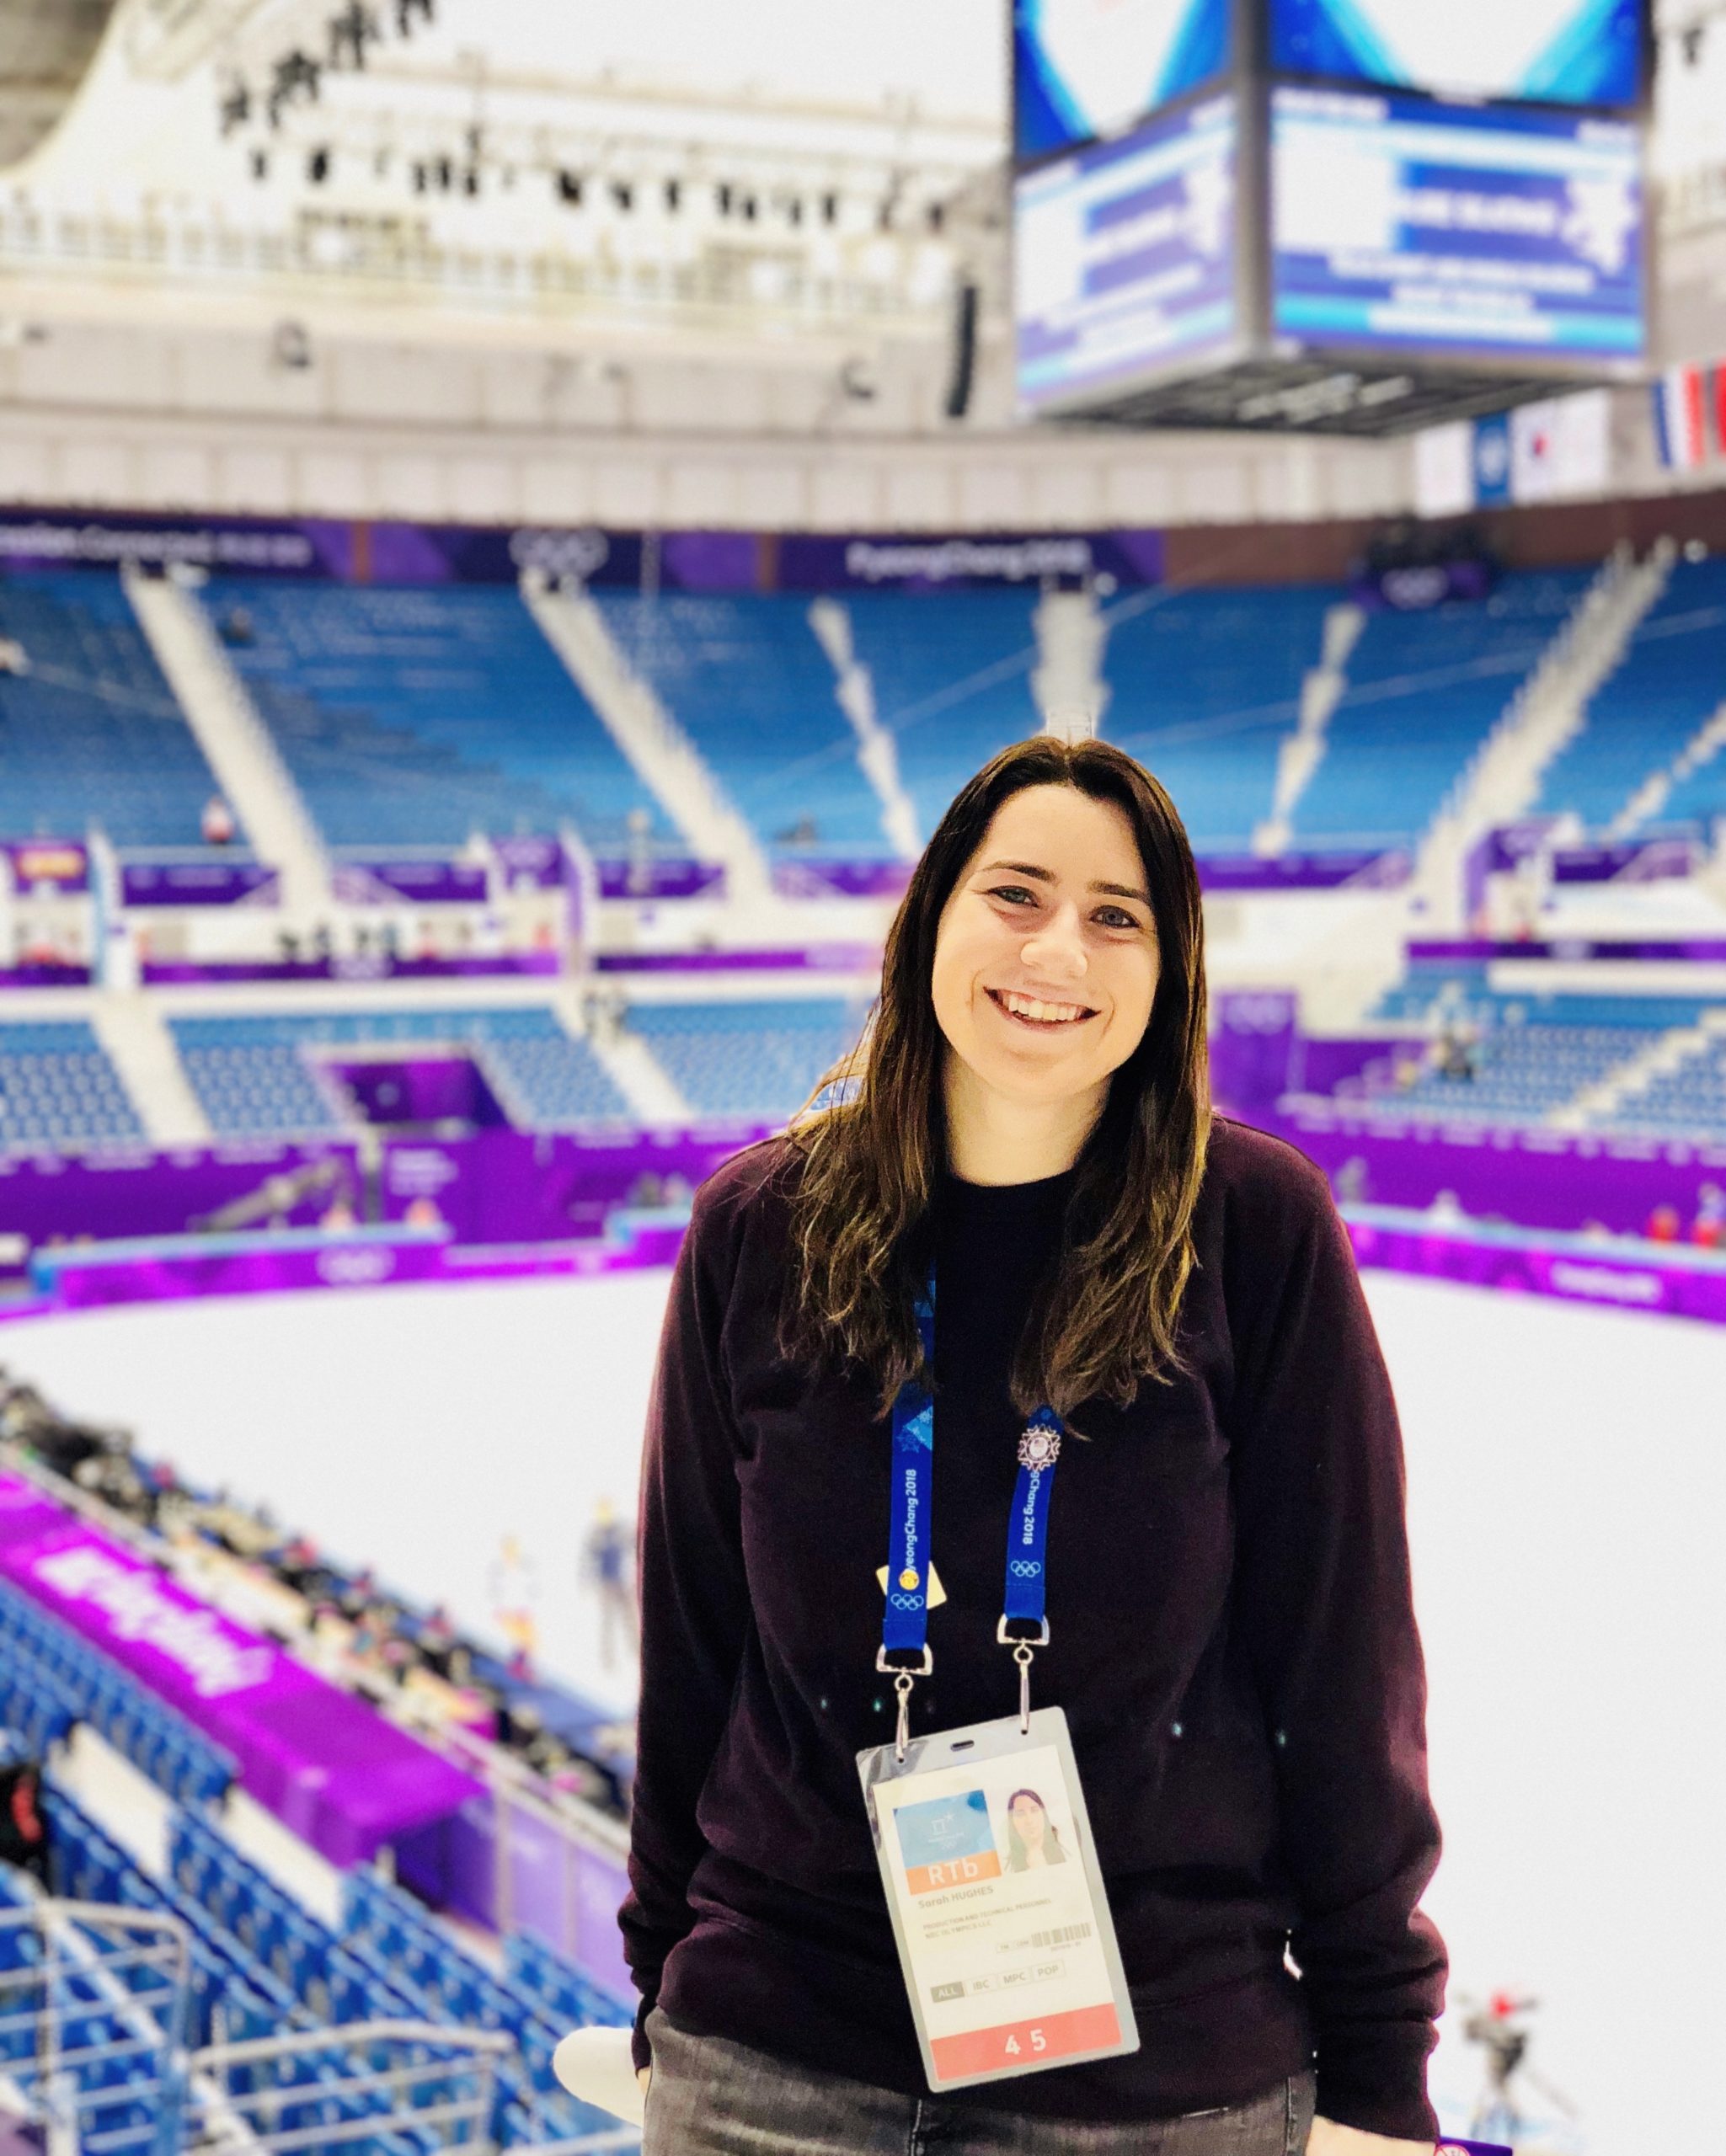 SPIA alum becomes Olympic researcher after graduation